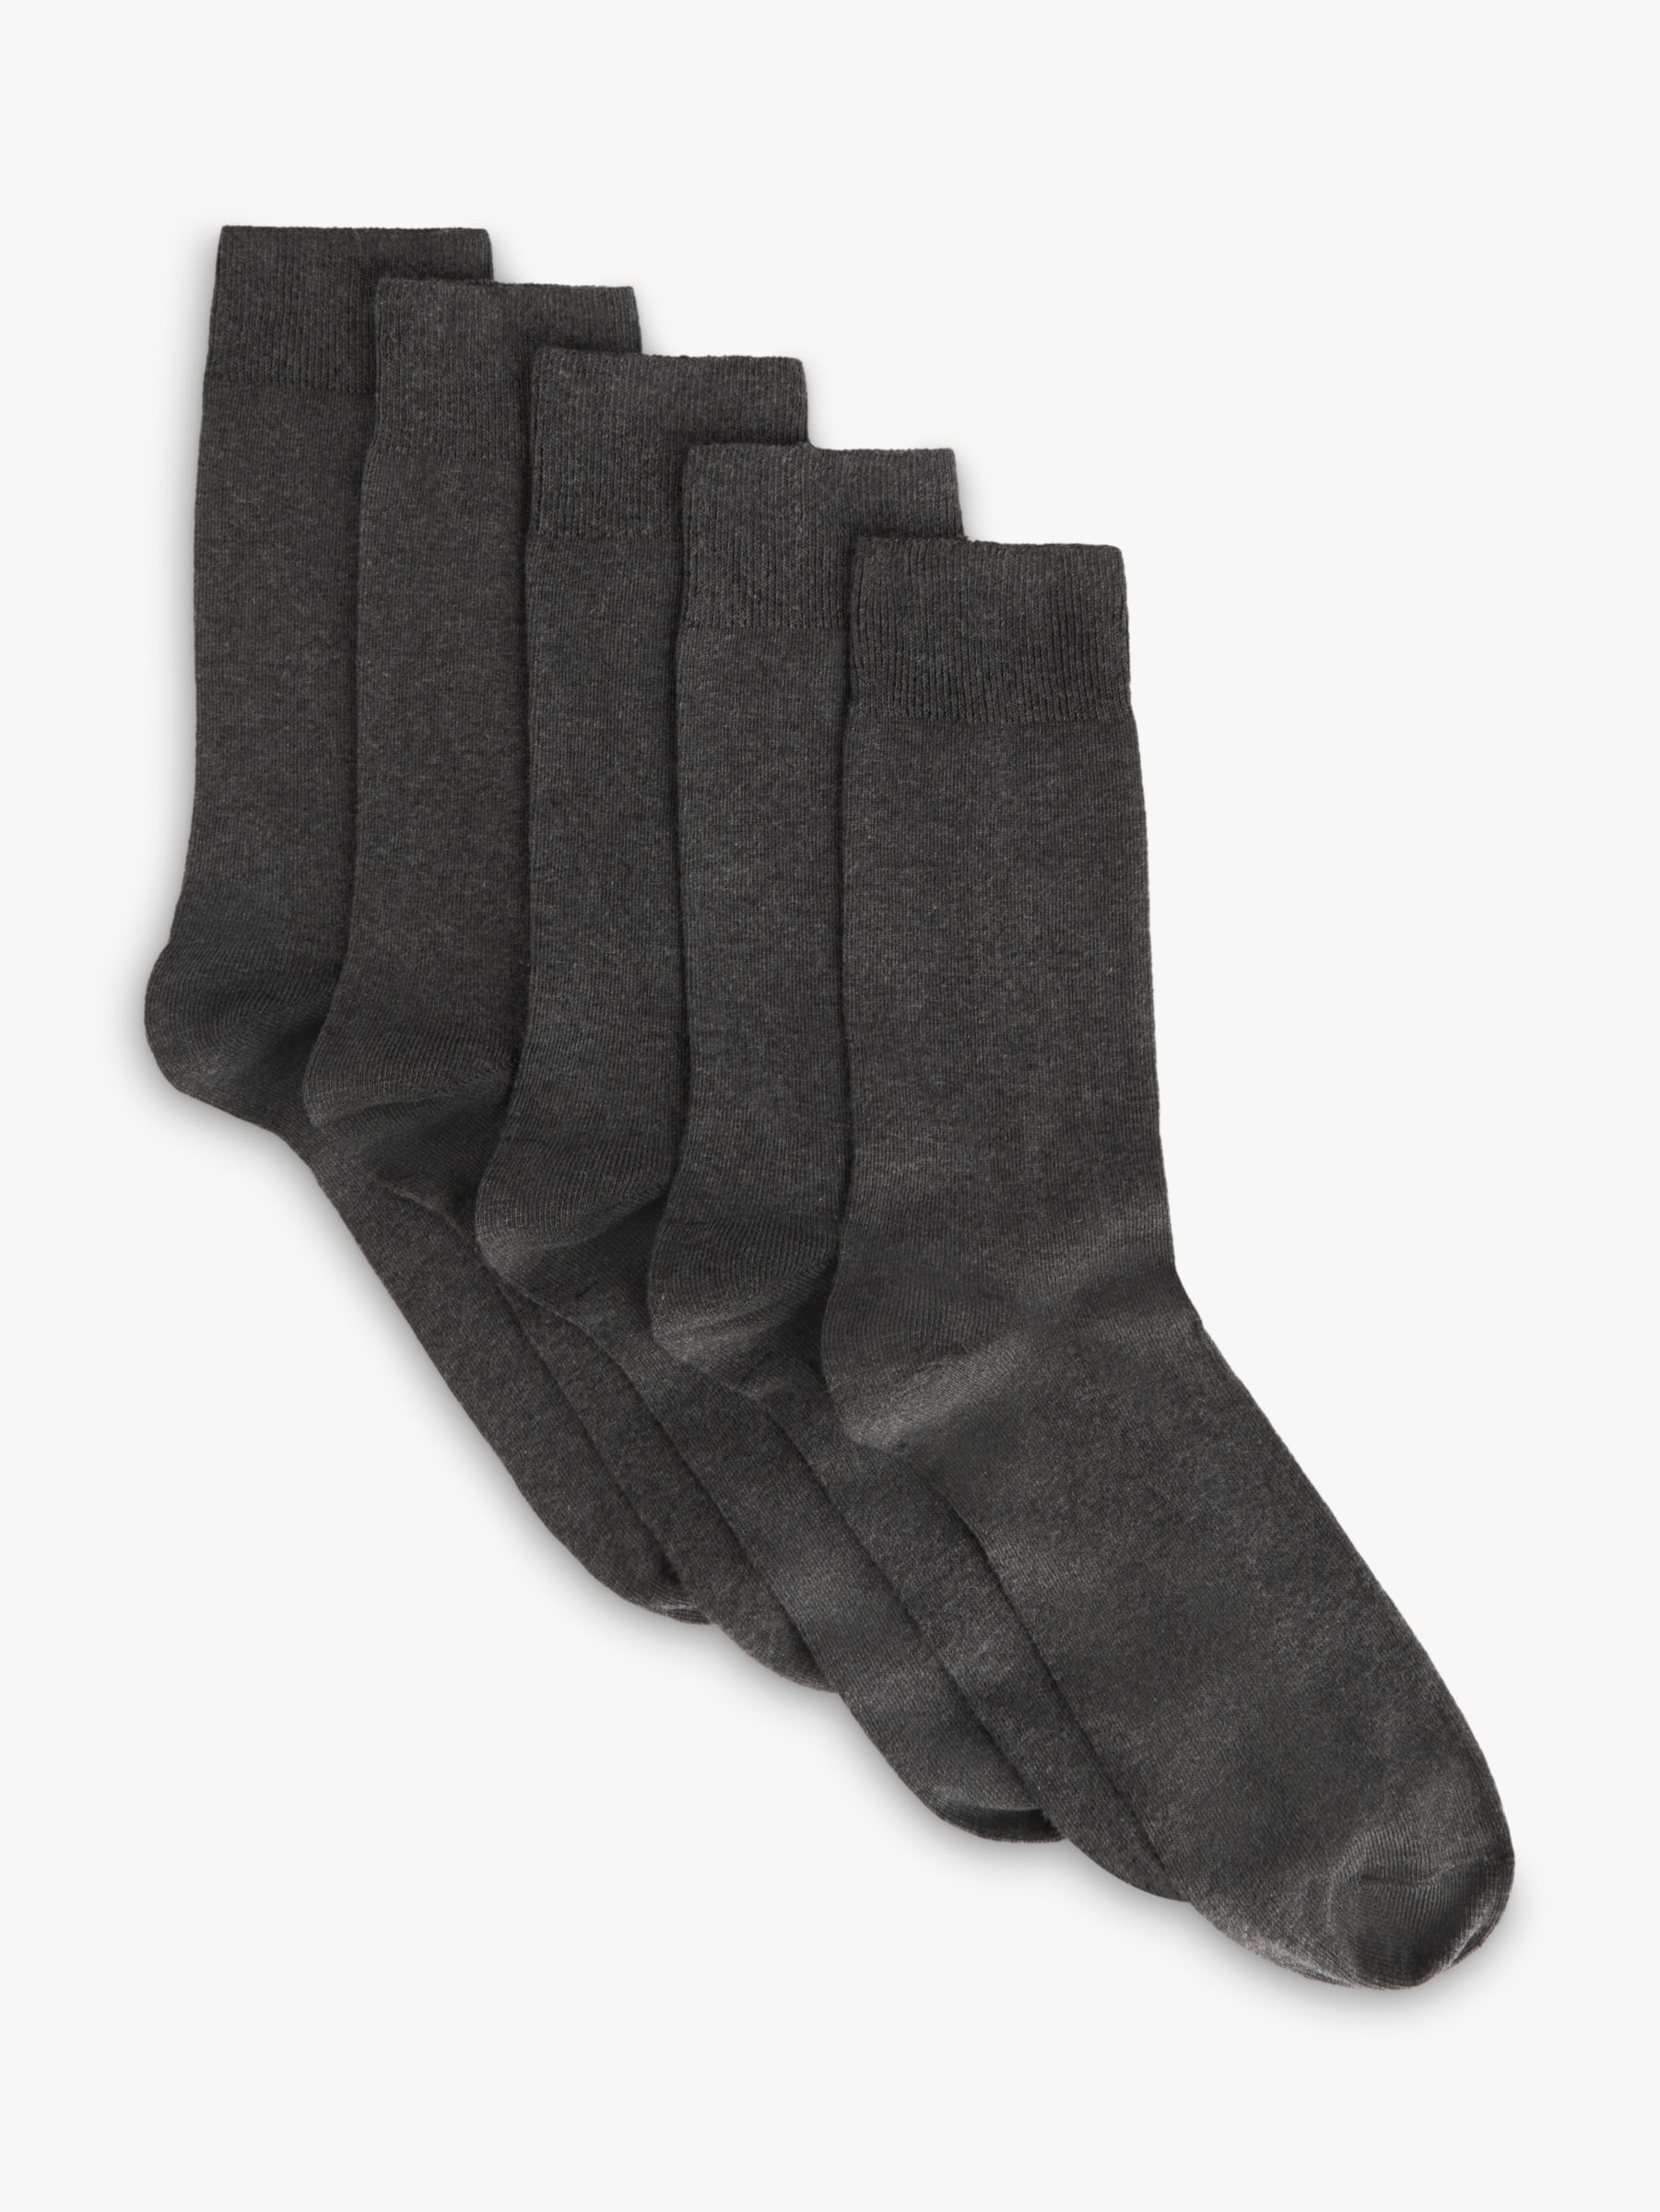 John Lewis ANYDAY Cotton Rich Plain Men's Socks, Pack of 5, Grey Charcoal, S